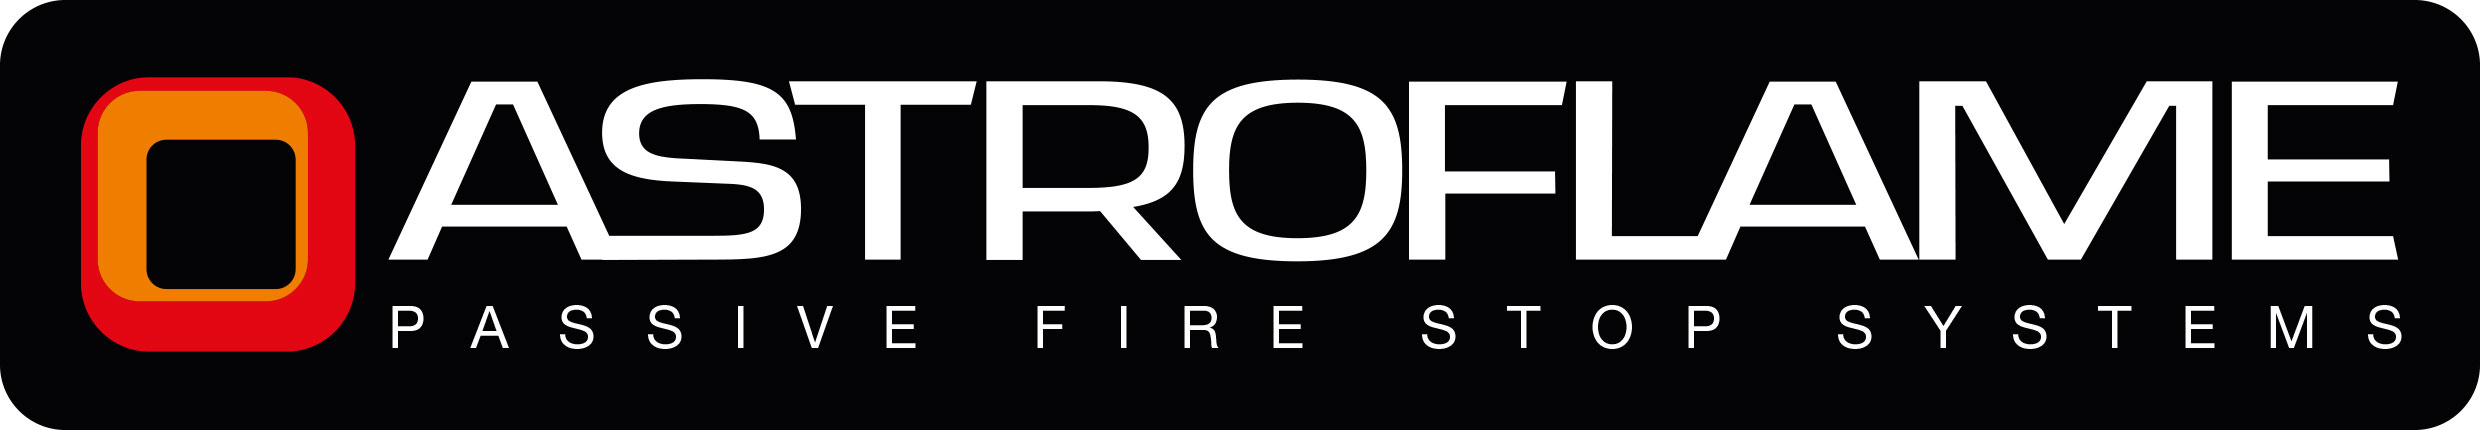 Astroflame Passive Fire Stop Systems Logo